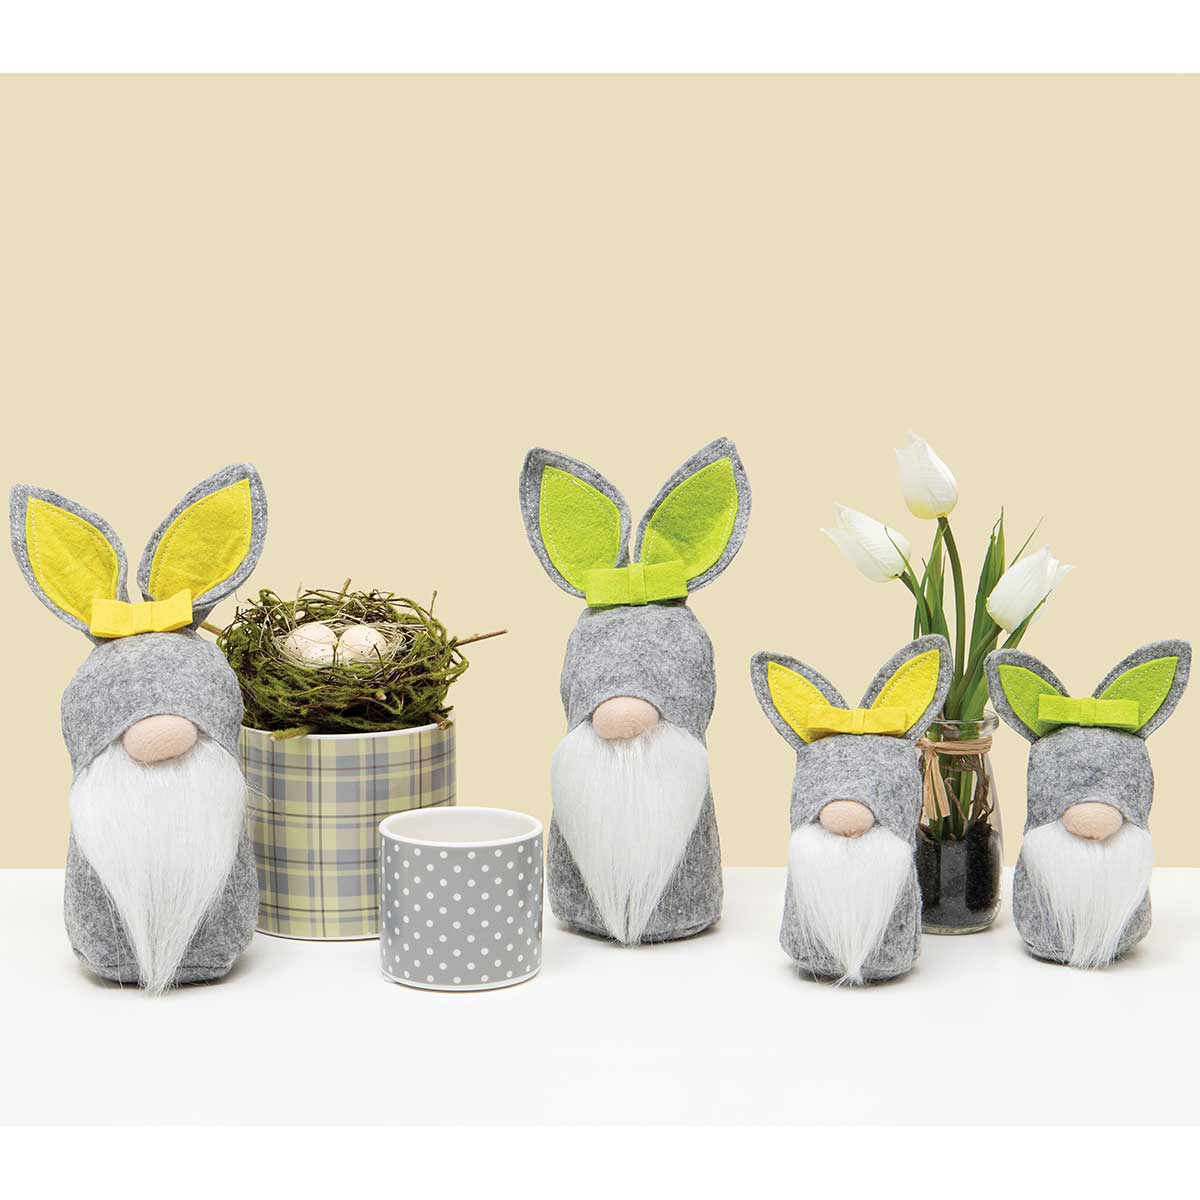 b70 GNOME BUNNY 2 ASSORTED 3.75IN X 3IN X 5.25IN - Click Image to Close